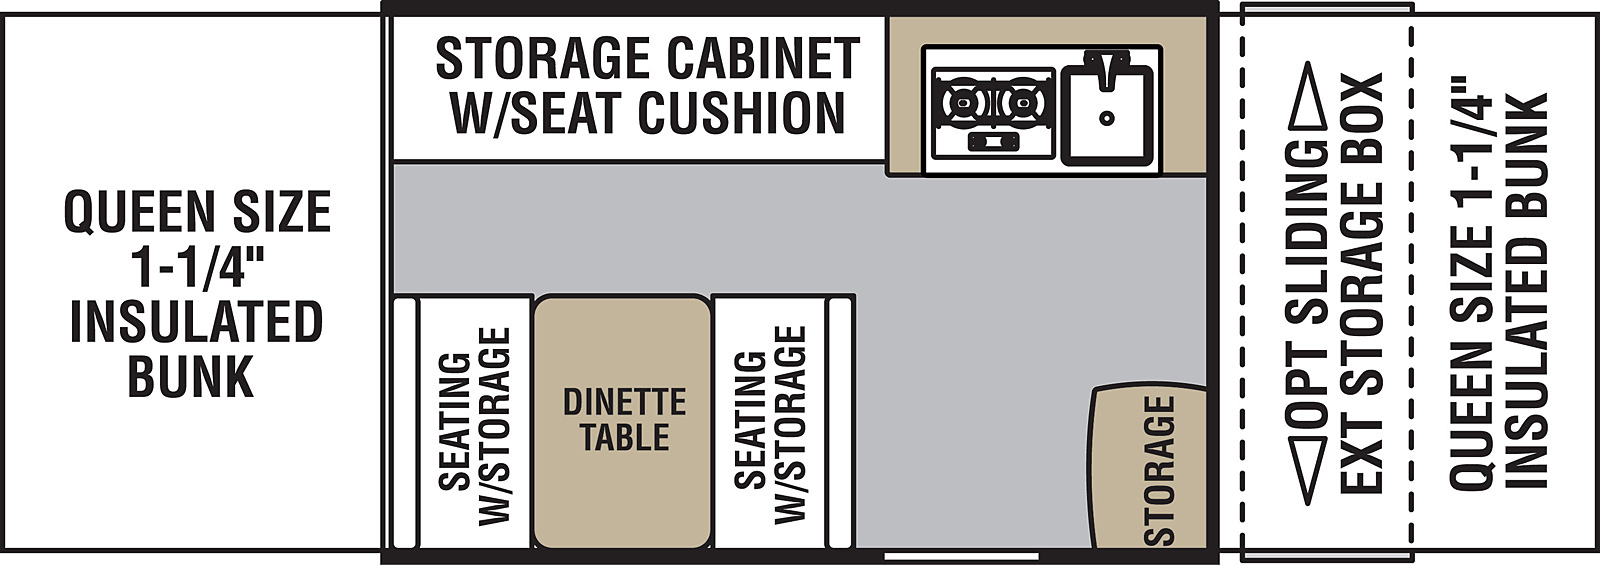 The Viking V -Trec V1  has 0 slideouts and 1 entry door. Interior layout from front to back; Queen size 1 1/4 inch insulated bunk with sliding exterior storage box; off-door side range with sink and storage cabinet with seat cushions; door side storage near entry and dinette table on other side with seating with storage; rear Queen size bed with 1 1/4 inch insulated bunk.